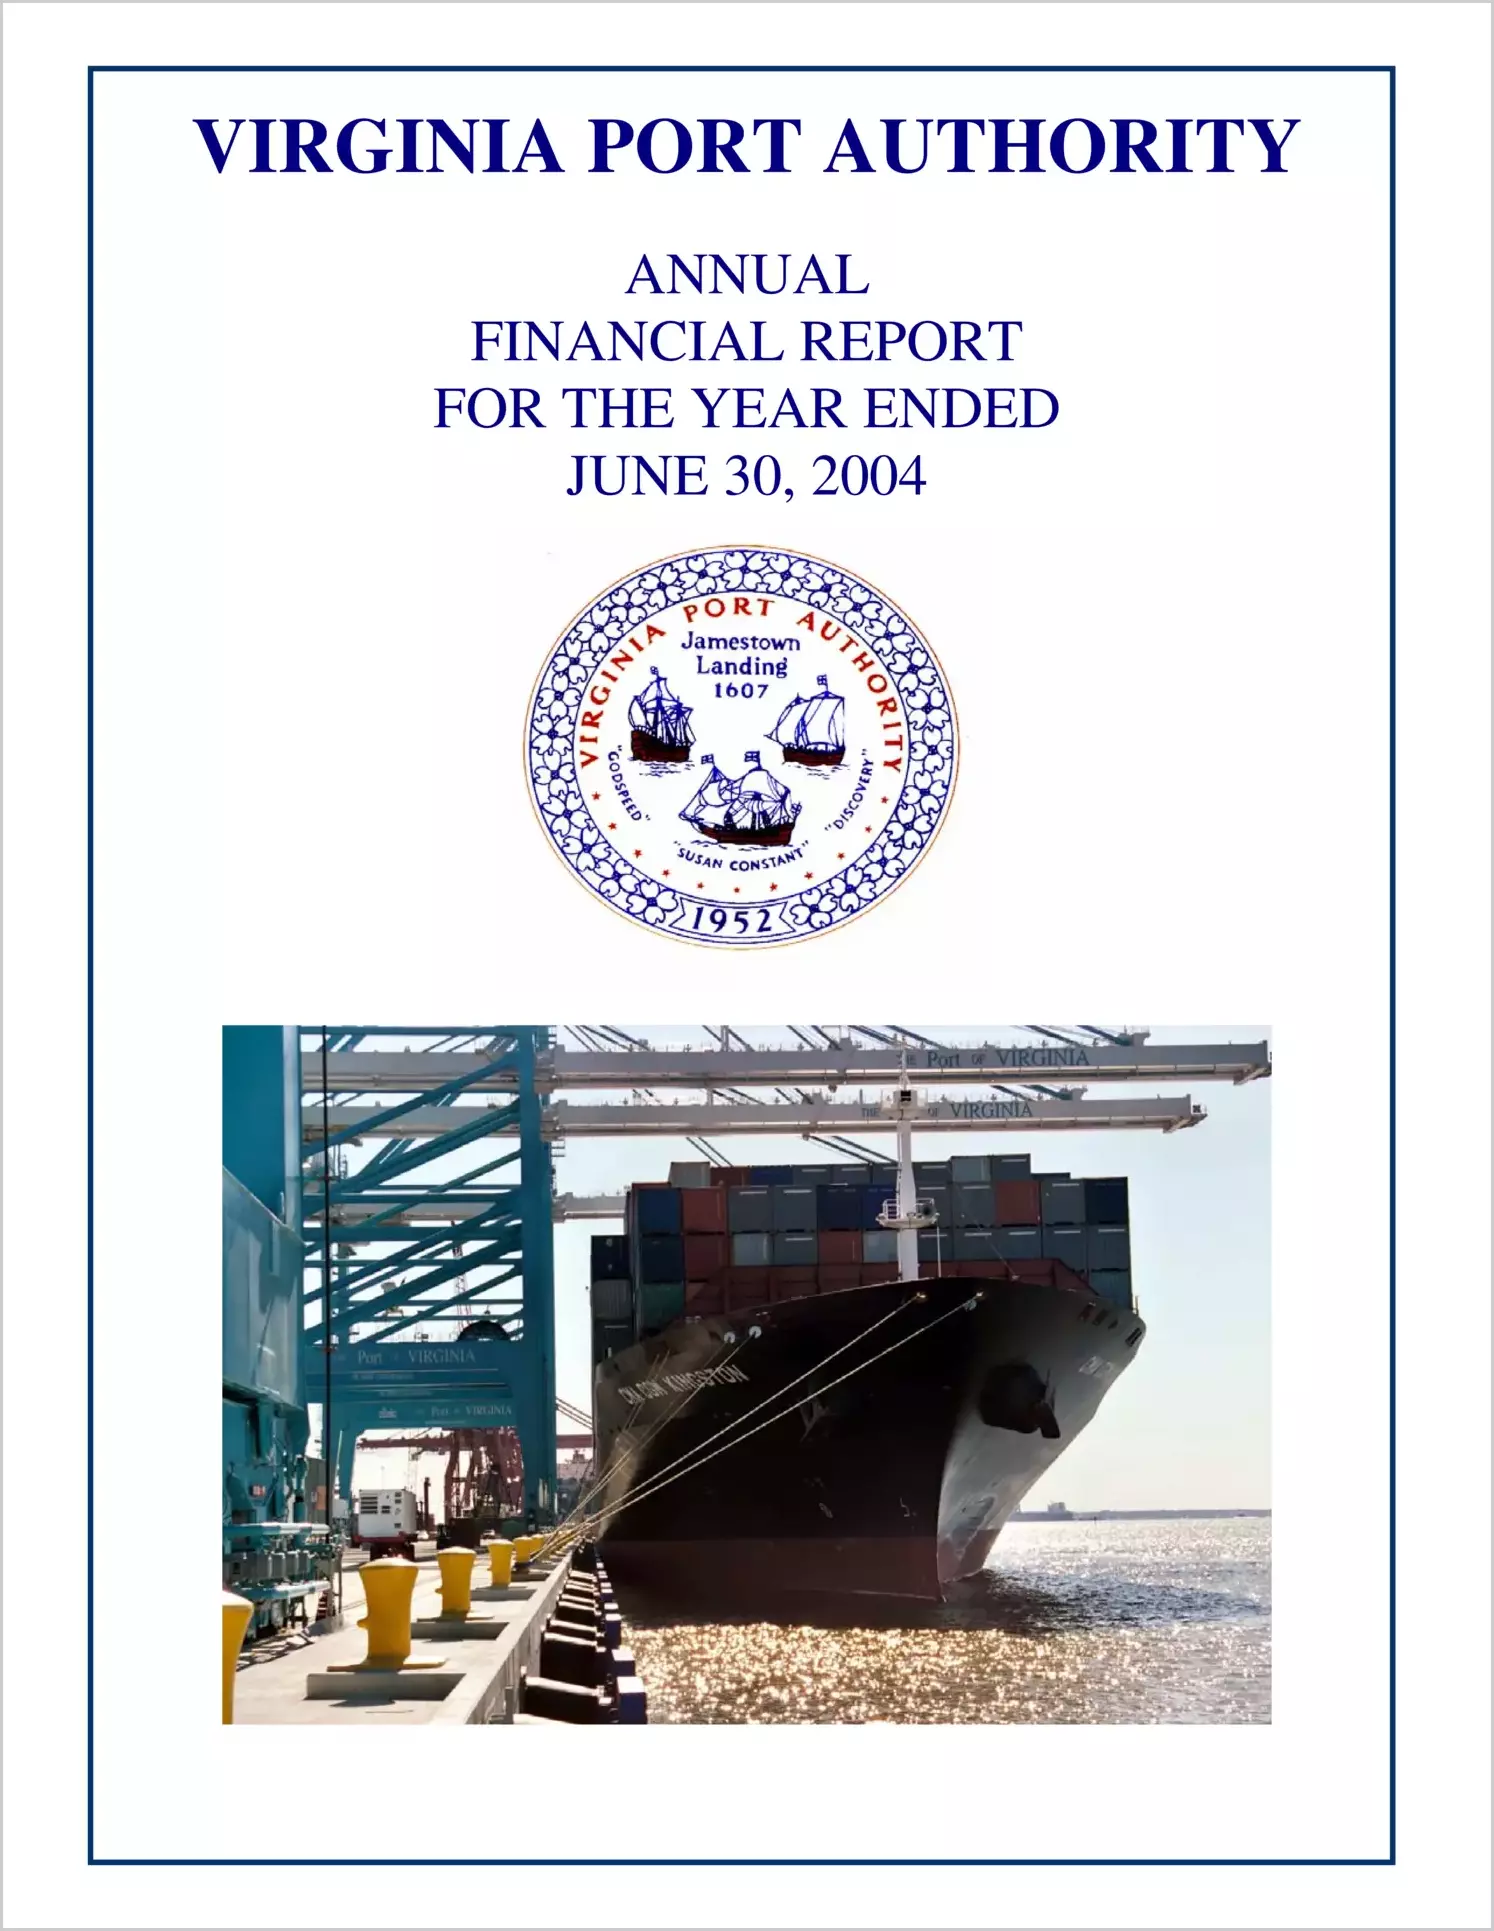 Virginia Port Authority Annual Financial Report for the year ended June 30, 2004